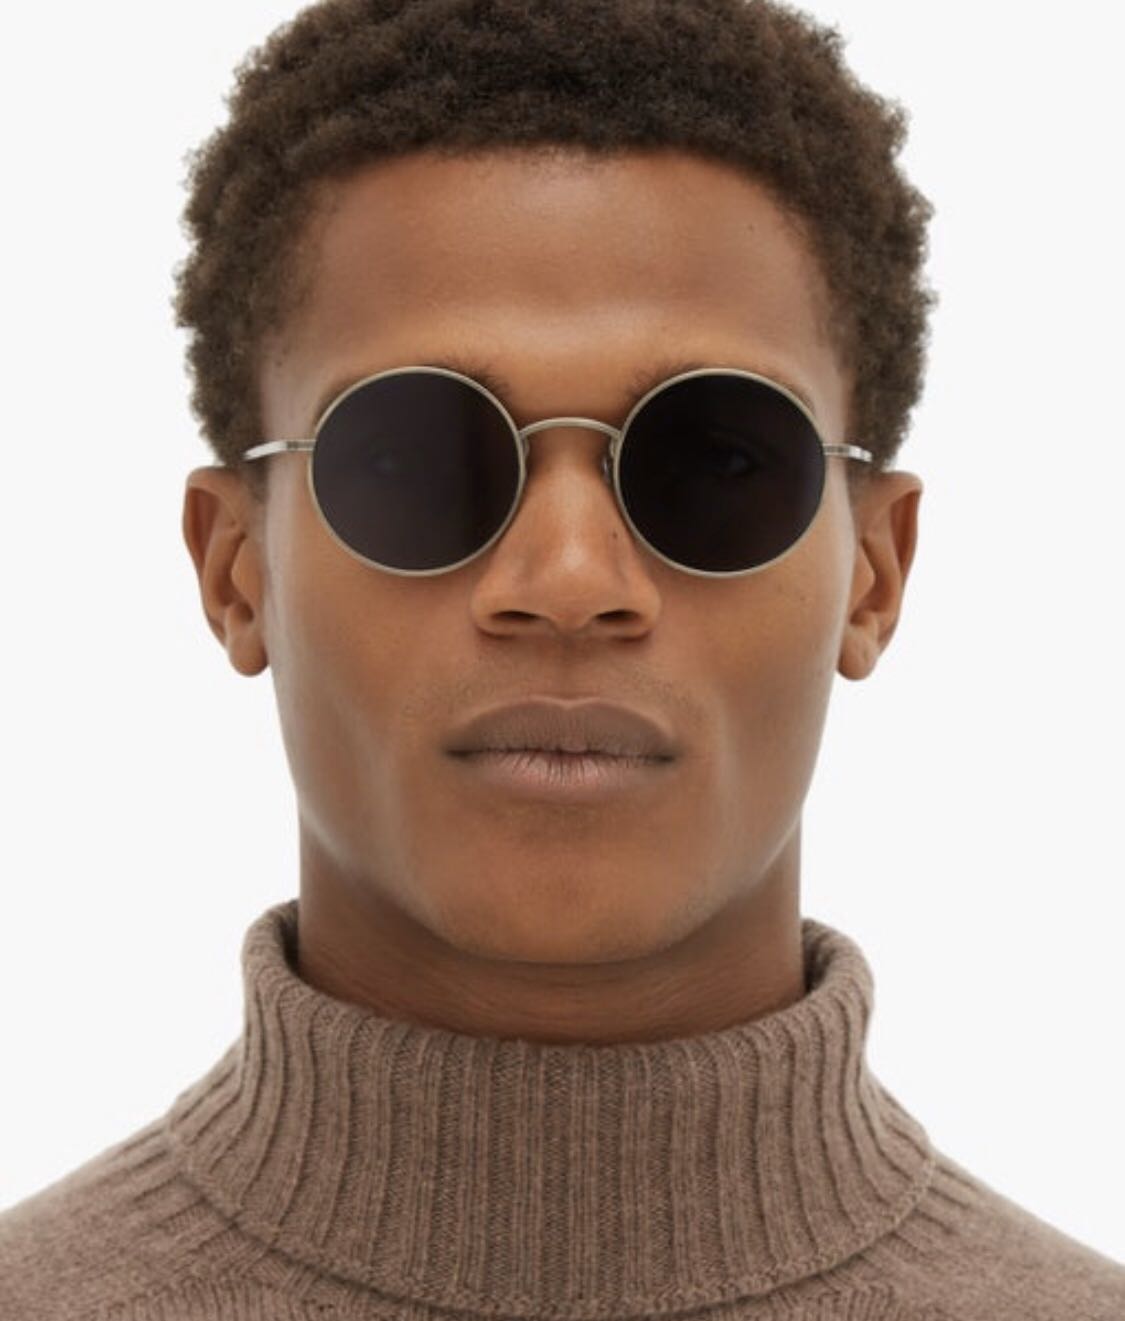 ⚫︎OLIVER PEOPLES THE ROW AFTER MIDNIGHT-